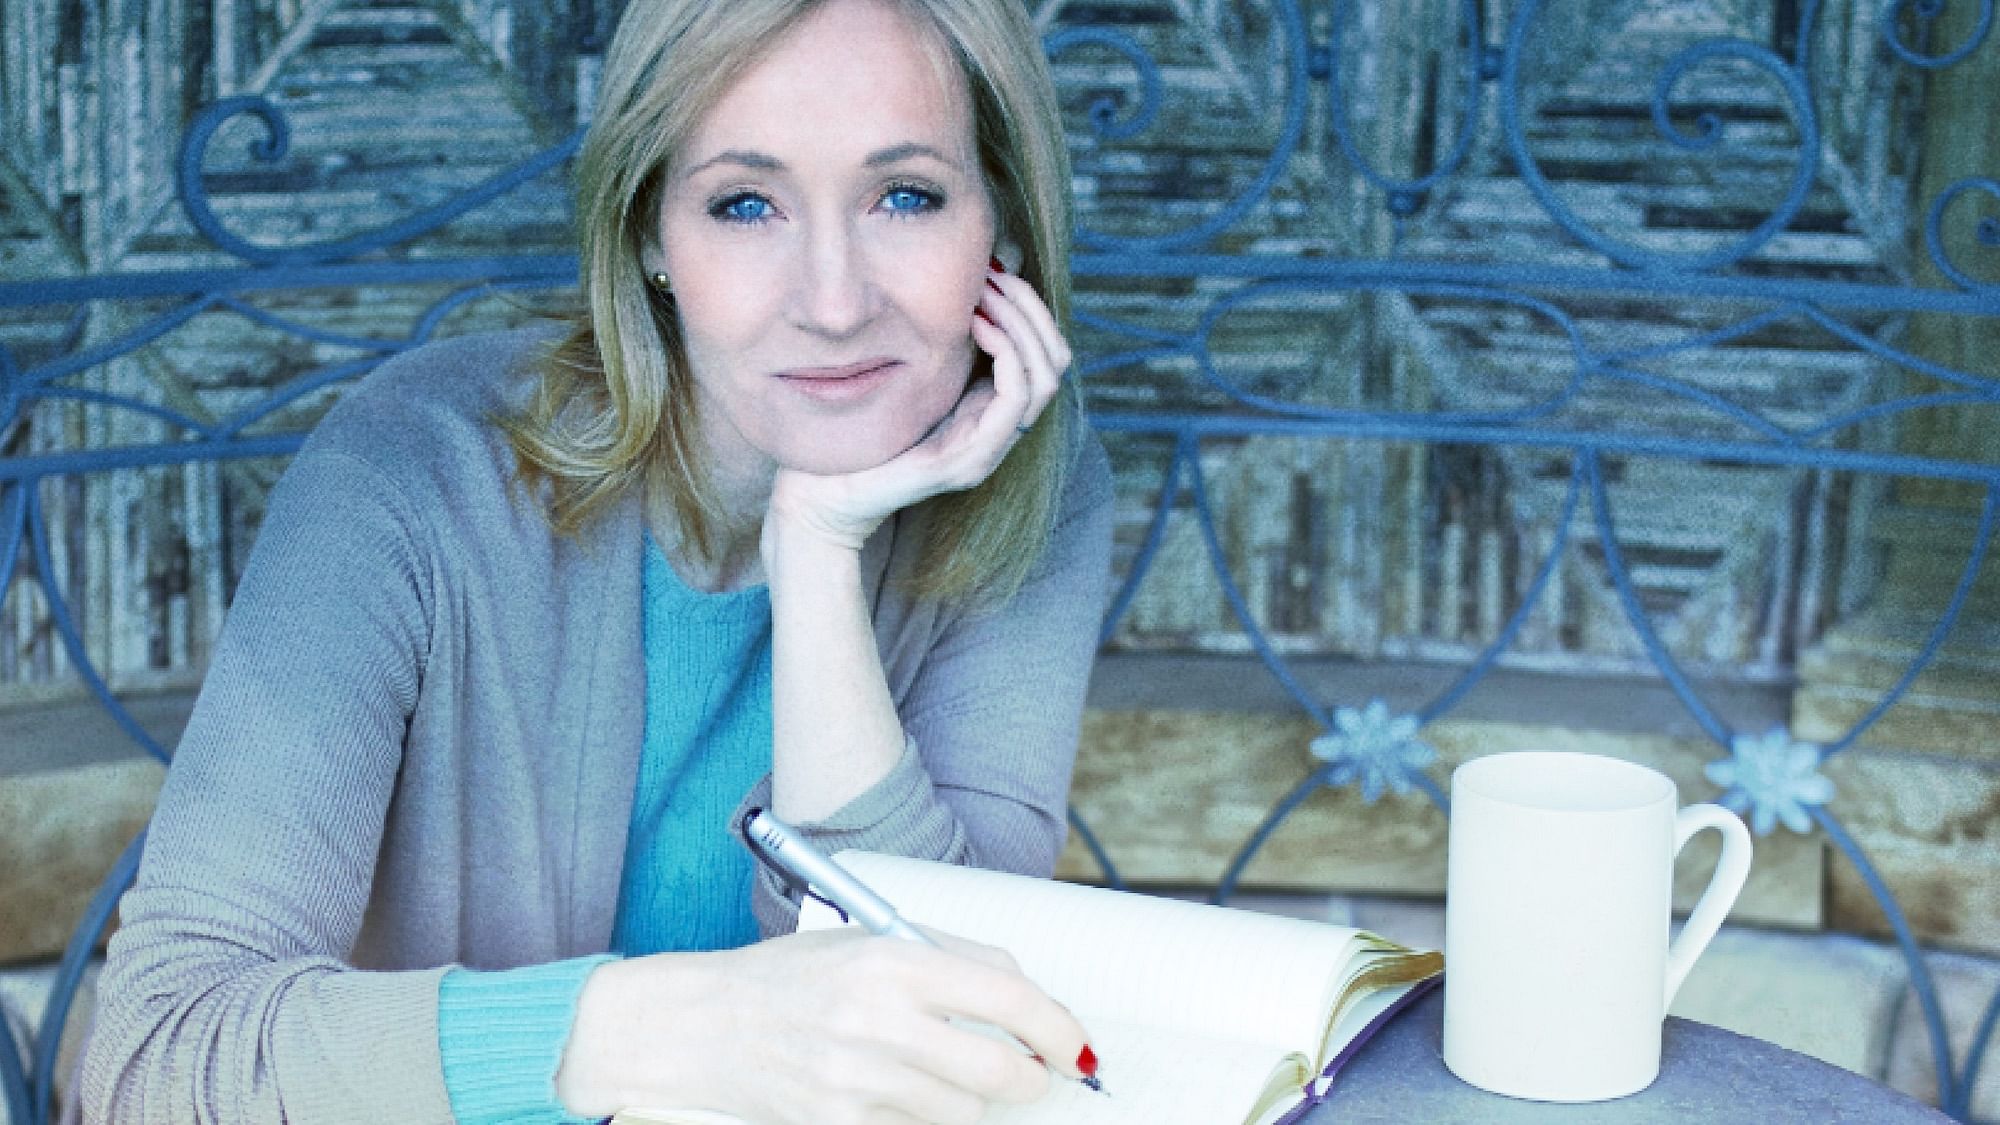 File image of author JK Rowling.